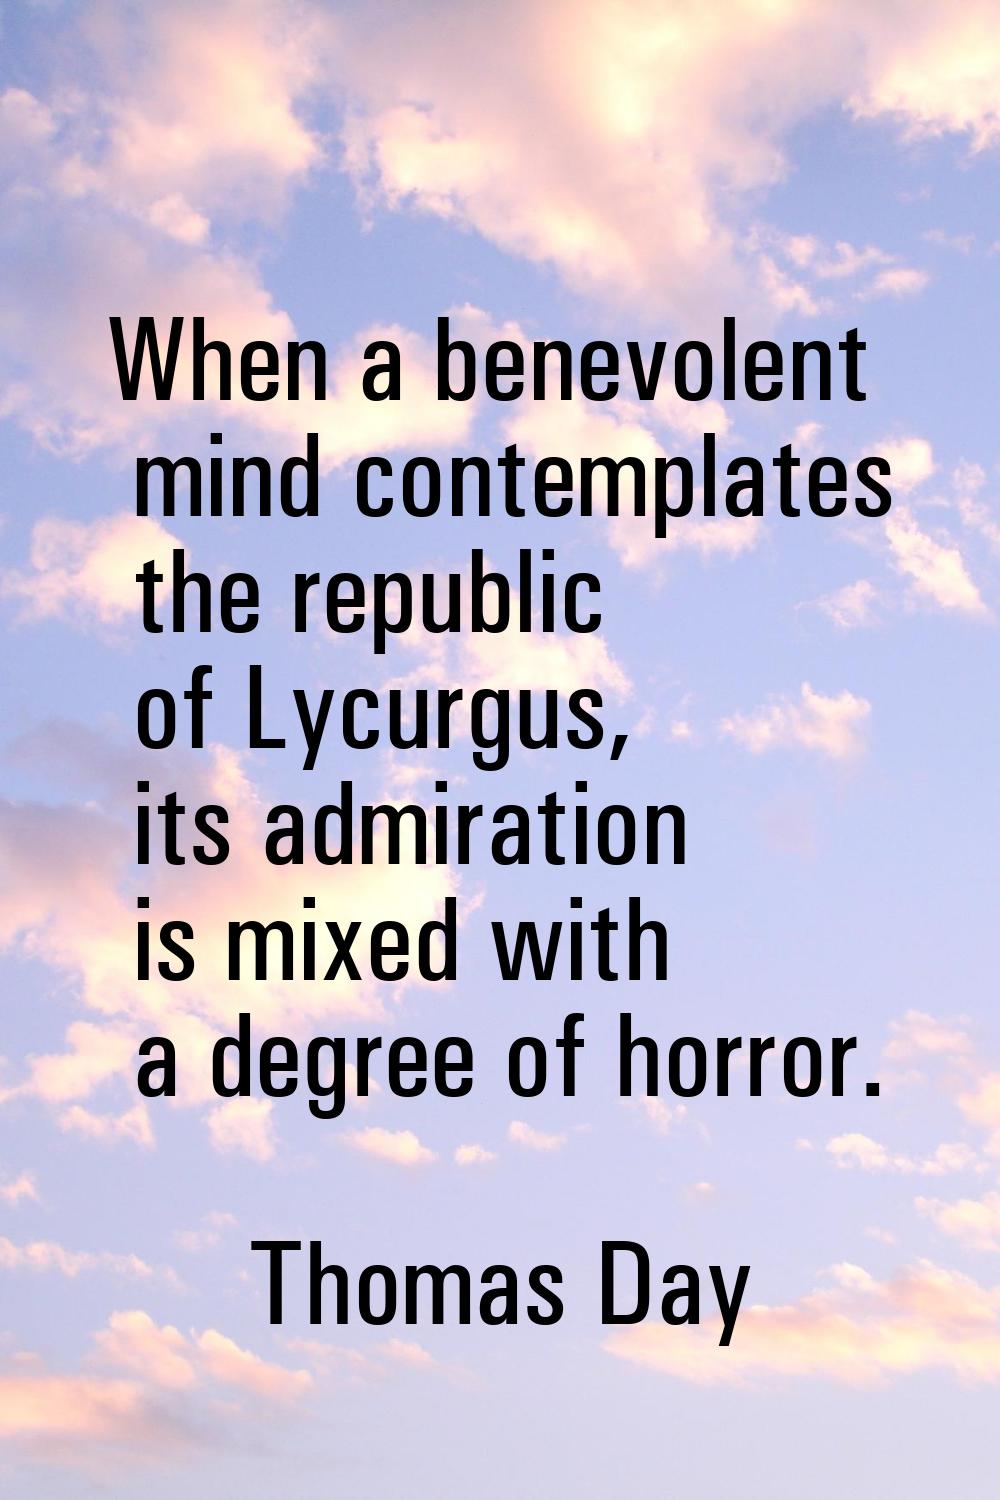 When a benevolent mind contemplates the republic of Lycurgus, its admiration is mixed with a degree